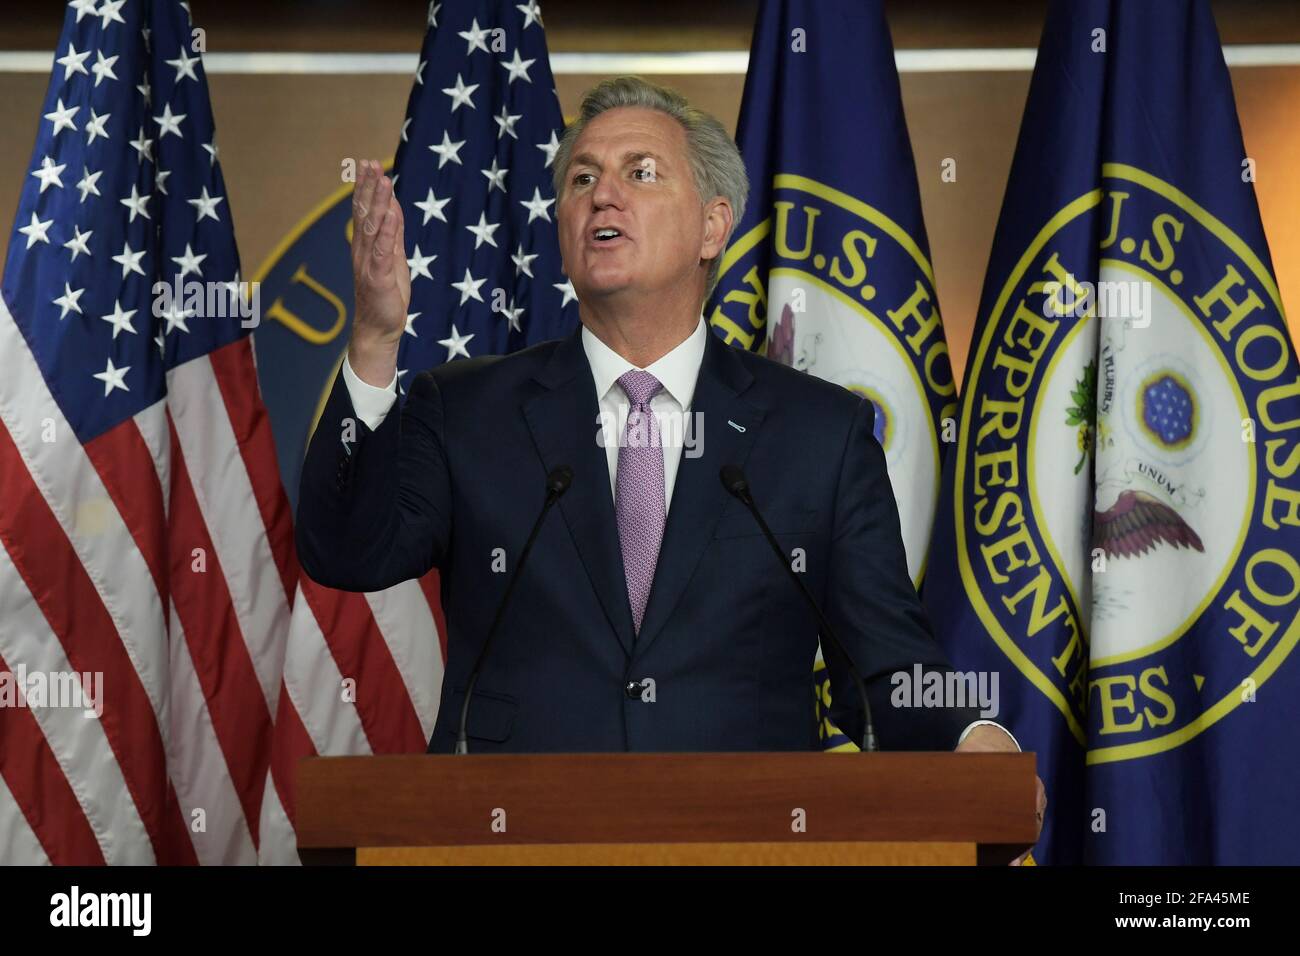 Washington, Distric of Columbia, USA. 22nd Apr, 2021. House Minority Leader KEVIN MCCARTHY(R-CA) speaks during his weekly press conference, today on February 25, 2021 at House Triangle in Washington DC, USA. Credit: Lenin Nolly/ZUMA Wire/Alamy Live News Stock Photo